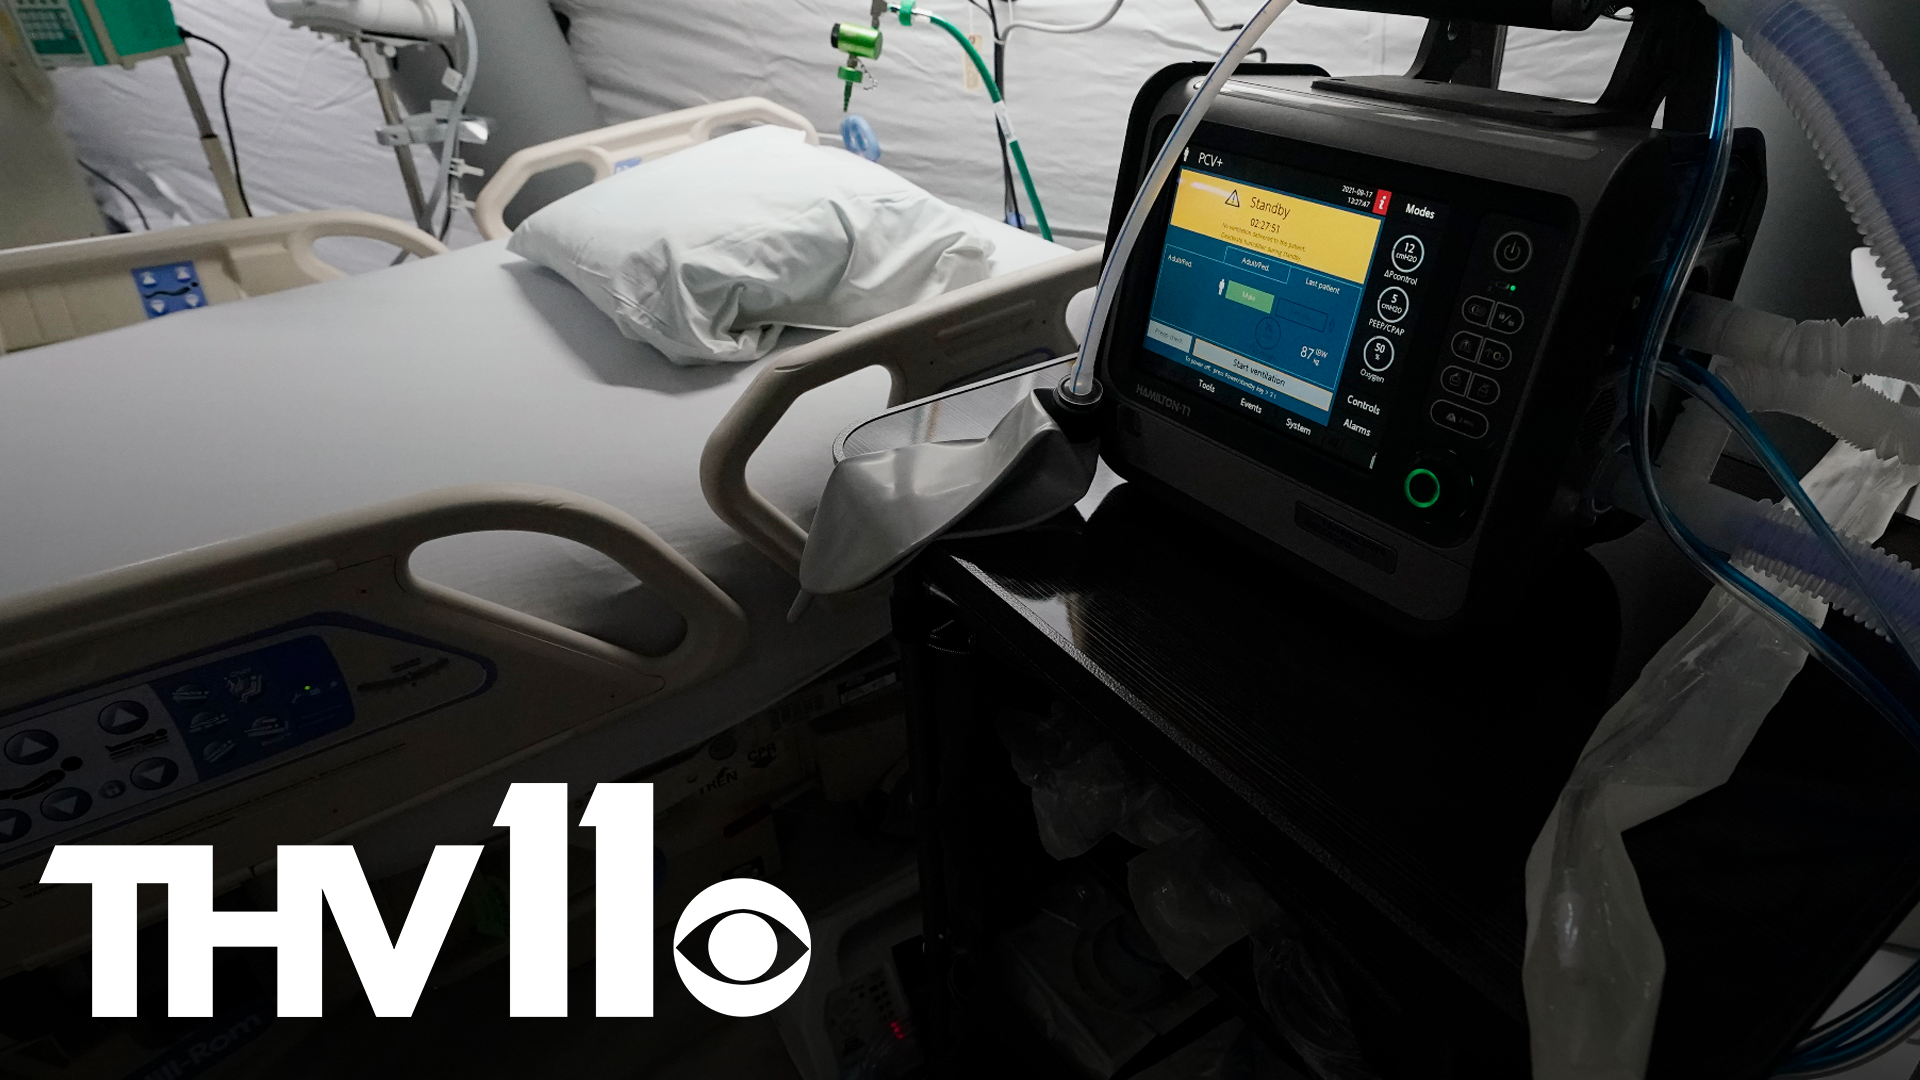 The strain on hospitals in Arkansas is growing even worse as the state battles with a fluctuating limit on ICU beds available for COVID patients.